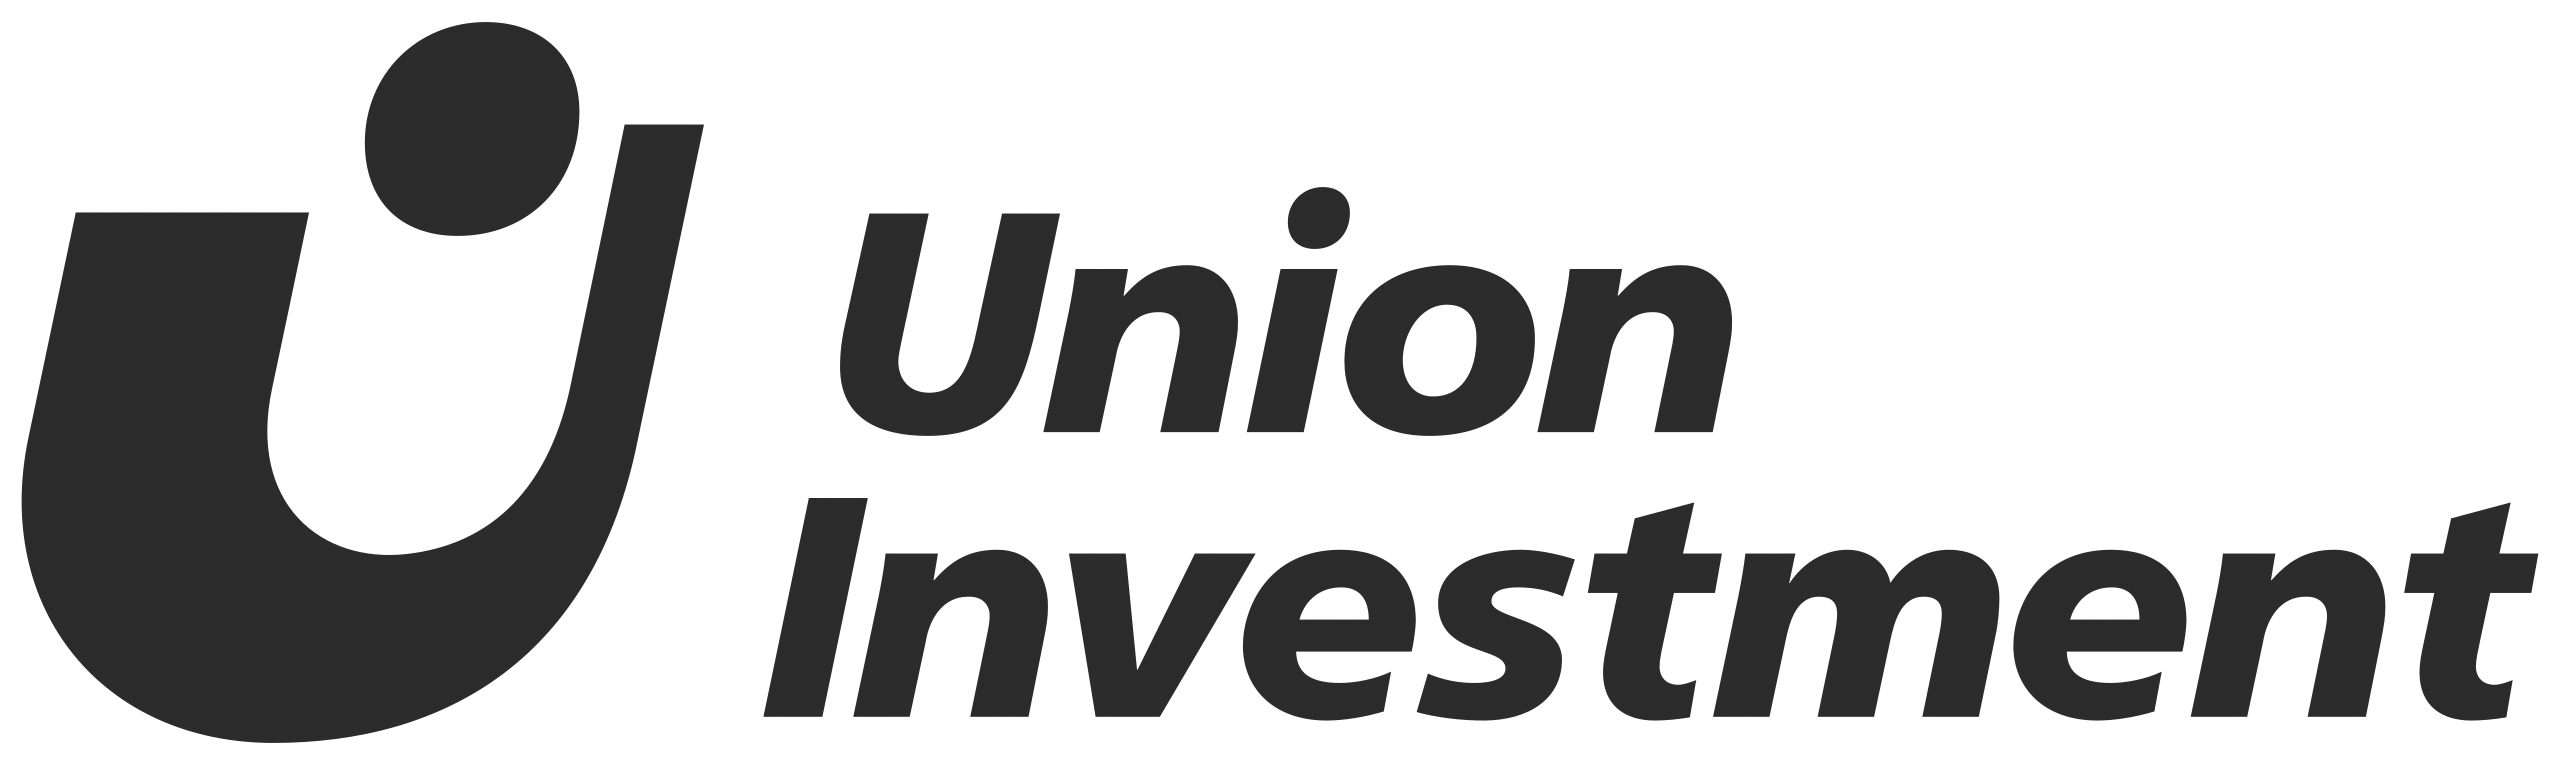 union_investment_logo.png